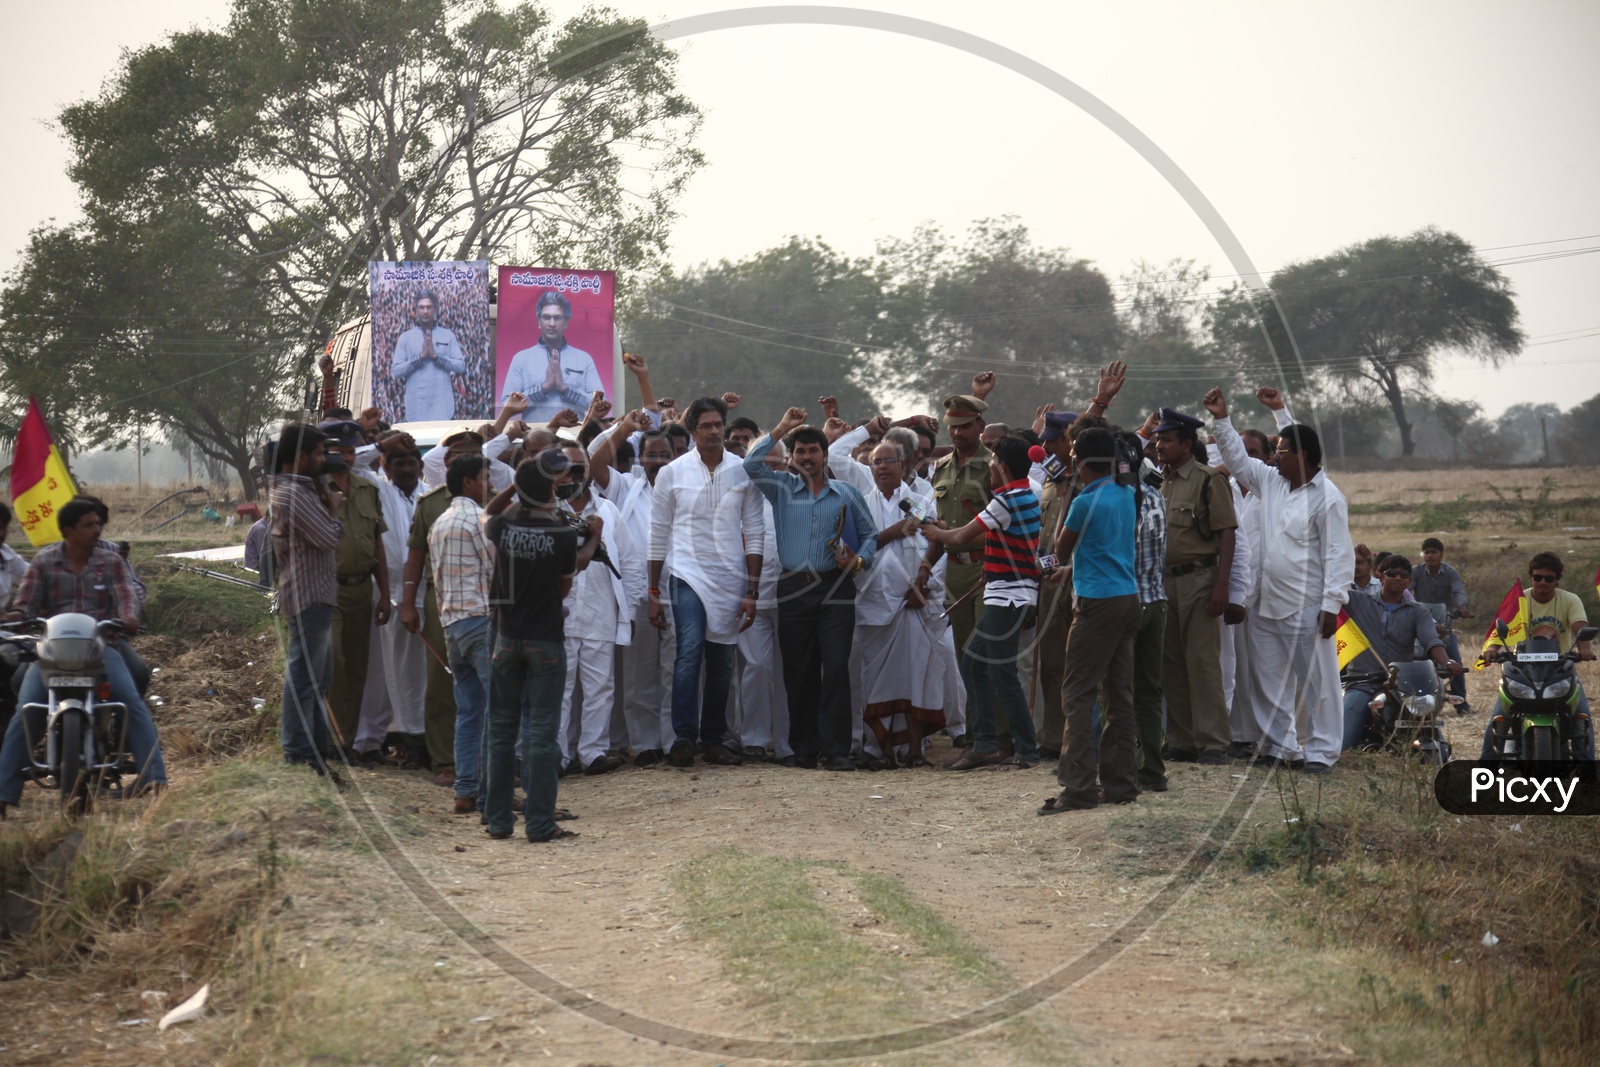 Rally Of a Political Party on Rural Area With Crowd Hailing The  Leader